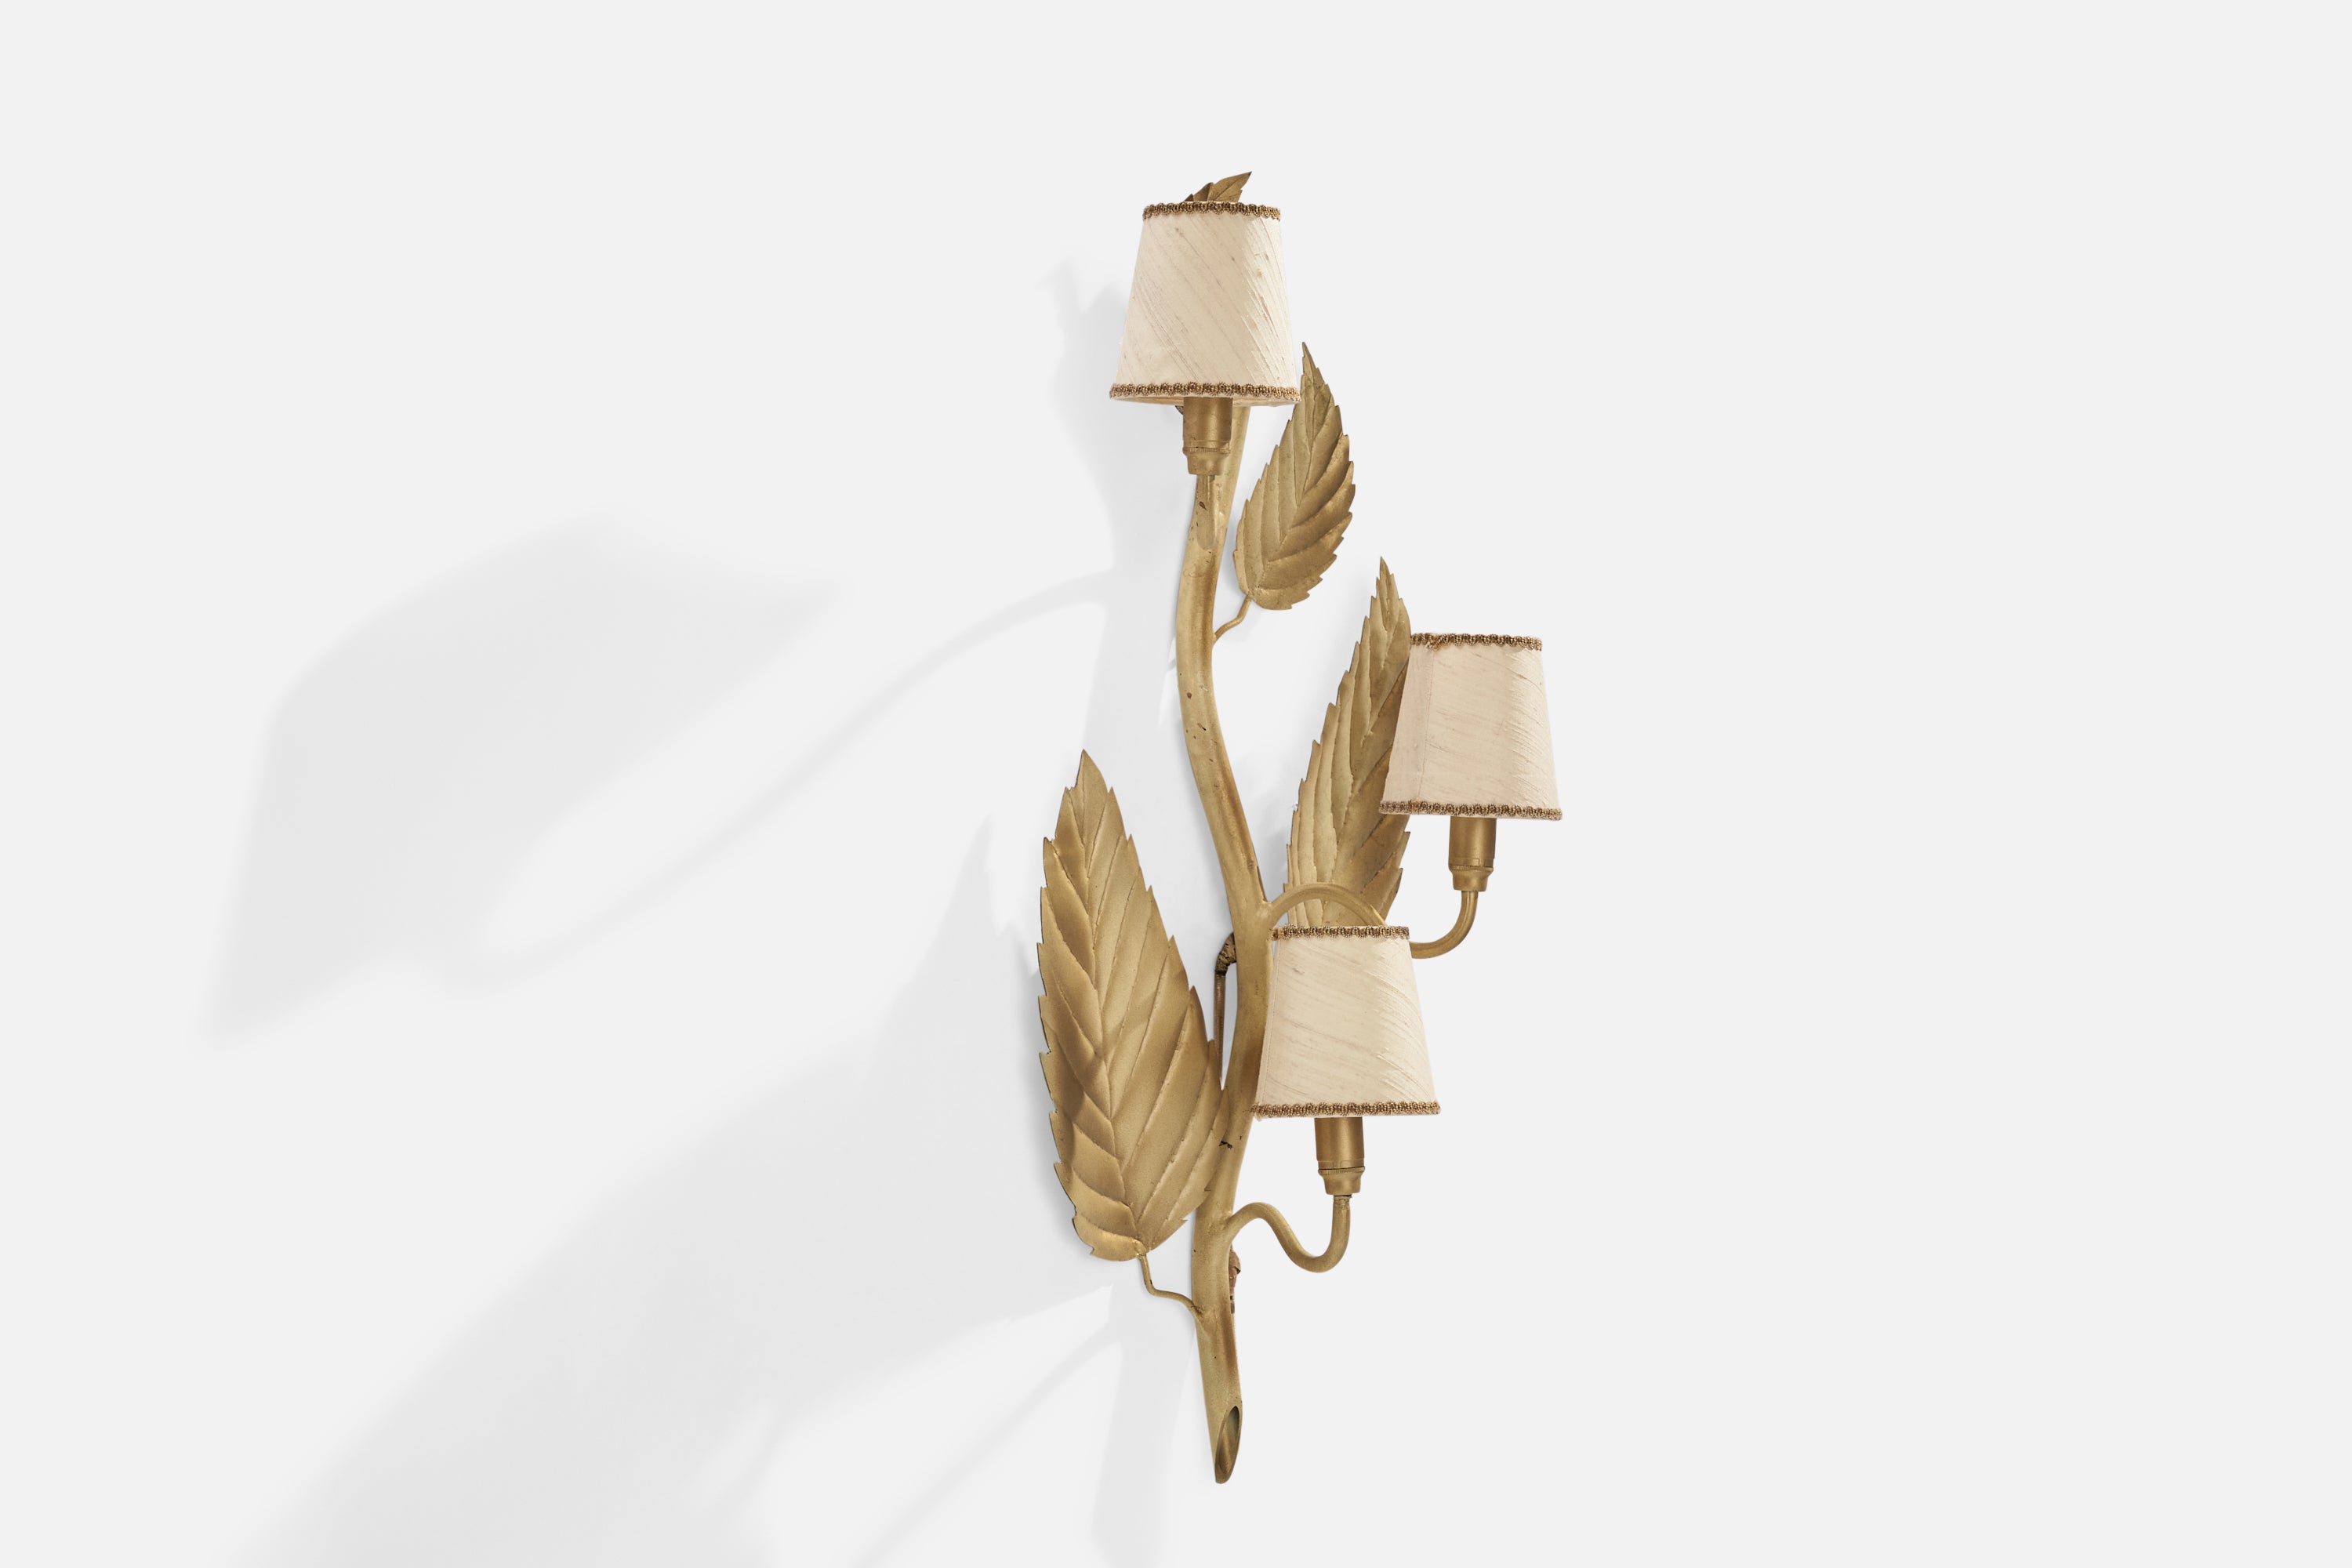 A three-armed beige-lacquered metal and off white fabric wall light attributed to Bjerkås Armatur, Sweden, c. 1940s.

Overall Dimensions (inches): 30”  H x 12”  W x 7.25”  D
Back Plate Dimensions (inches): N/A
Bulb Specifications: E-14 Bulb
Number